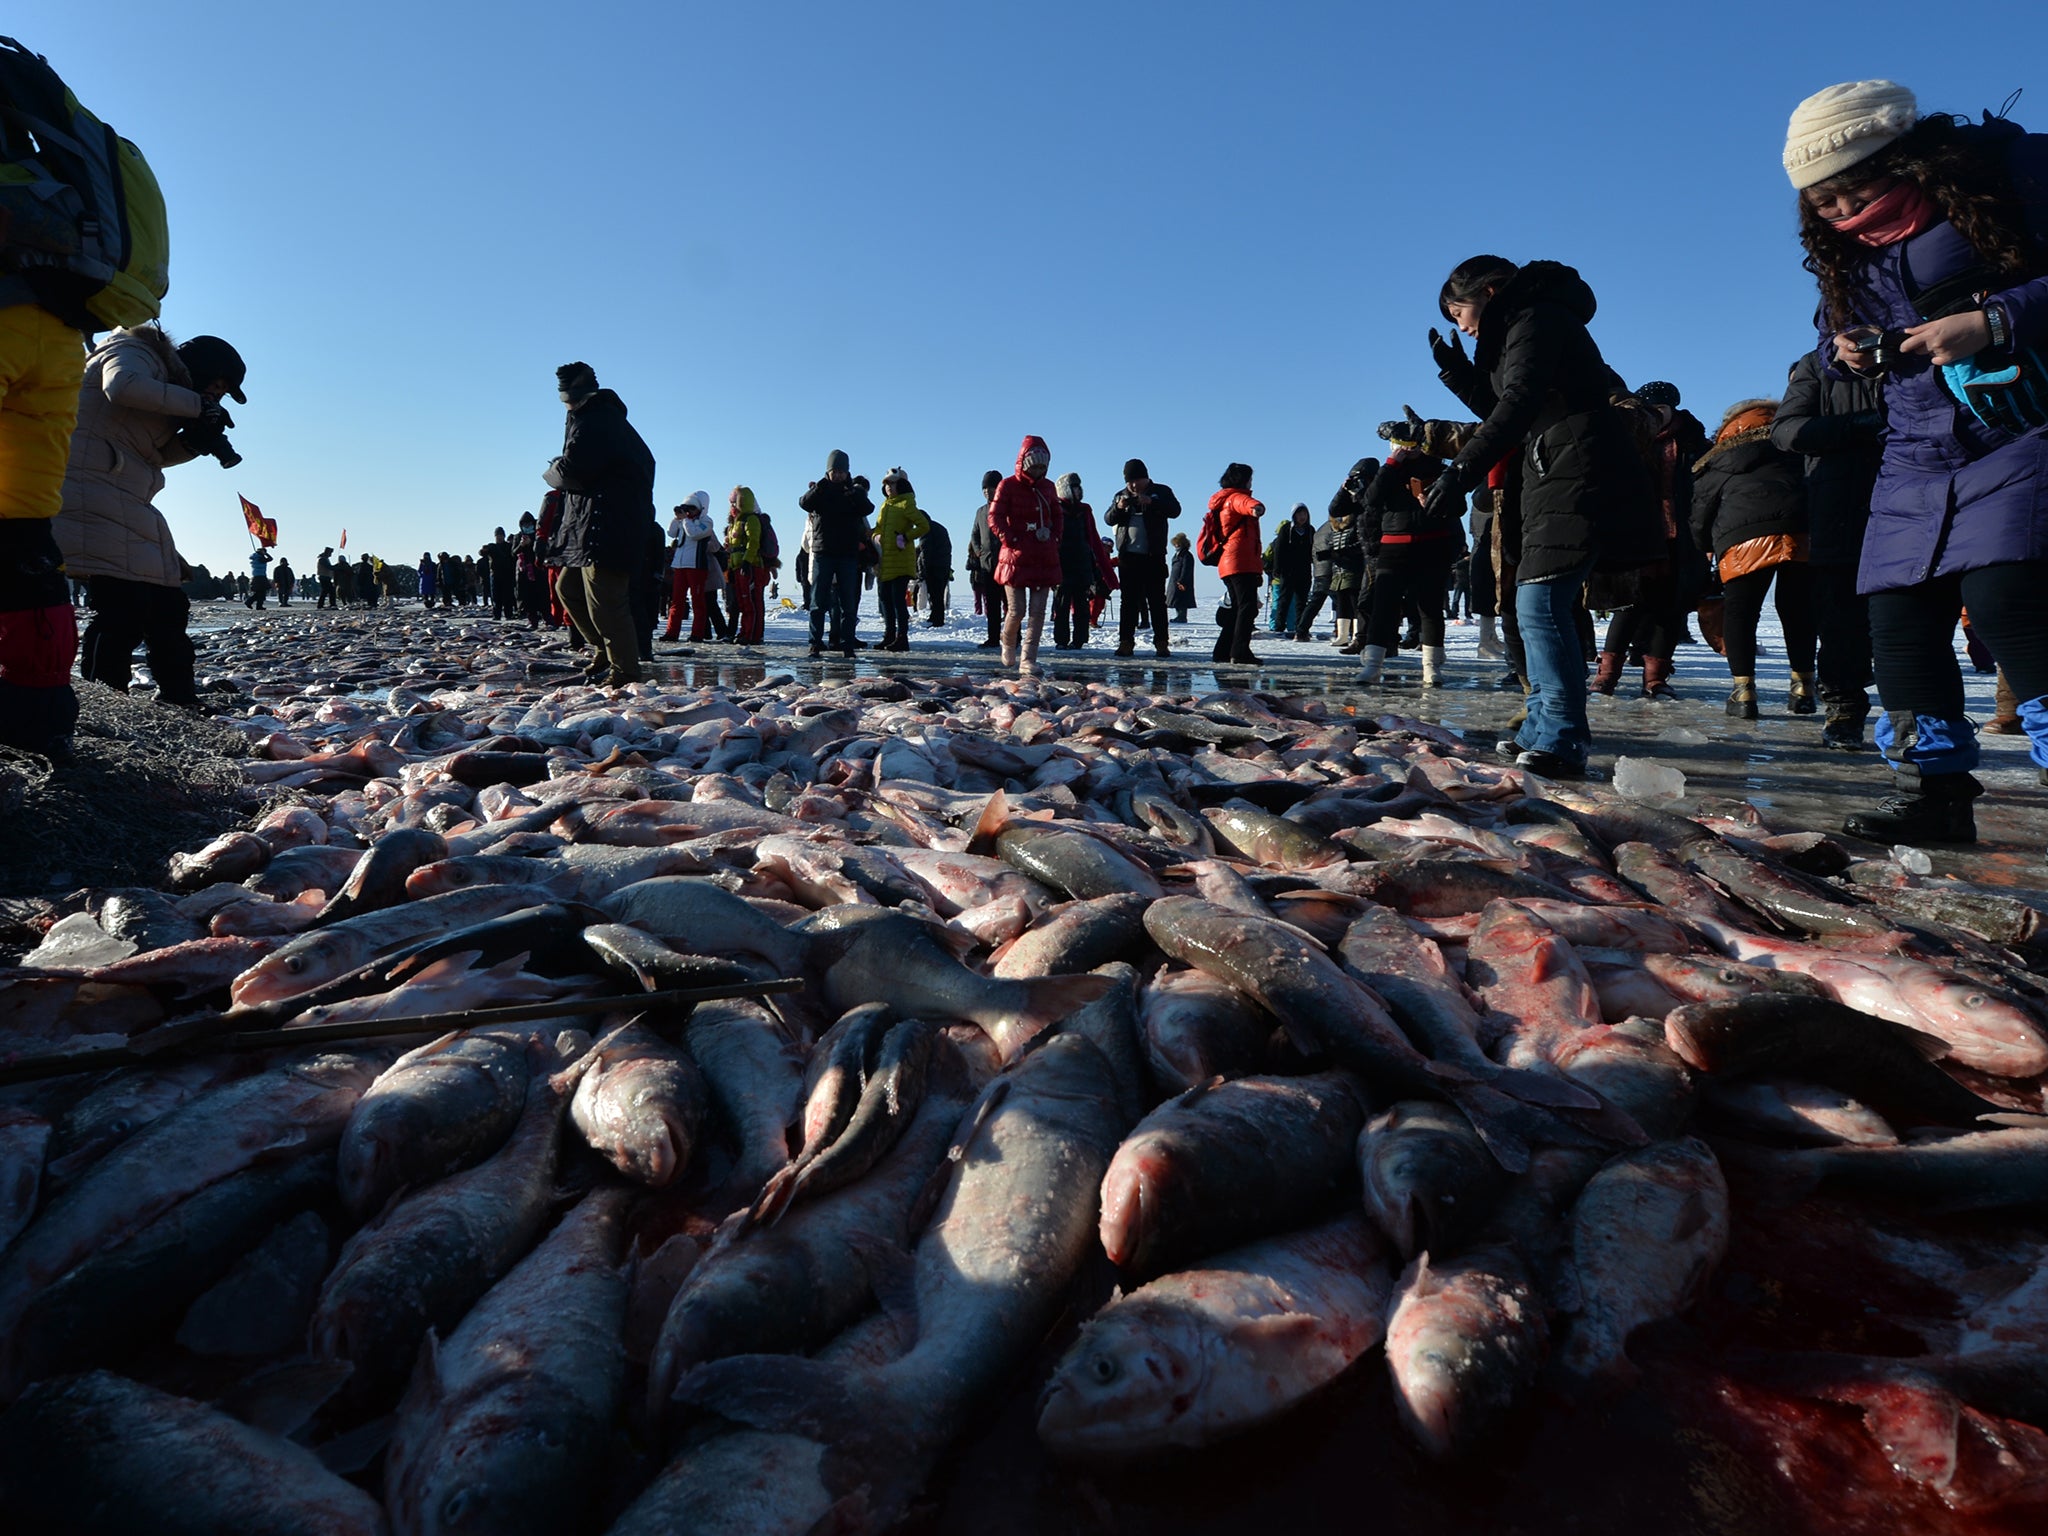 Chinese tourists come to buy fish at Chagan Lake in Jilin Province.